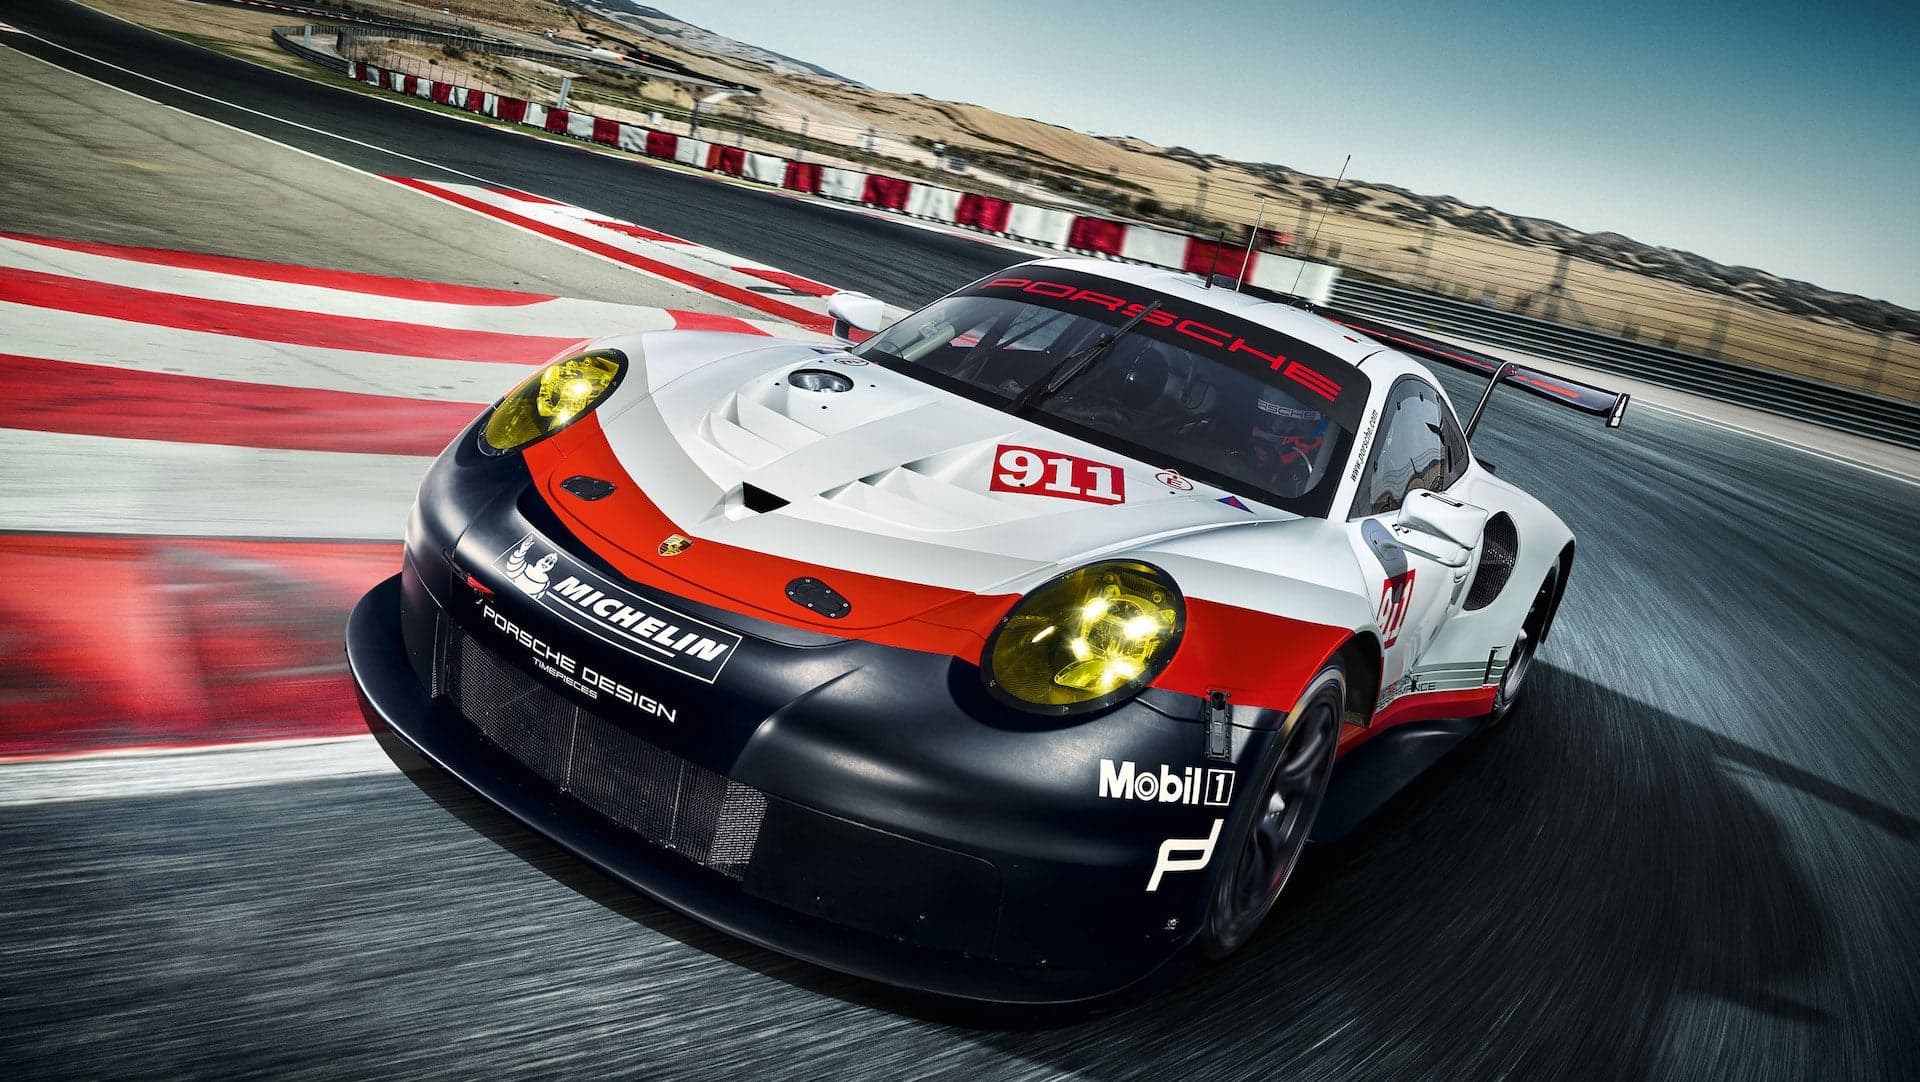 This Is the New Mid-Engined Porsche 911 RSR Race Car